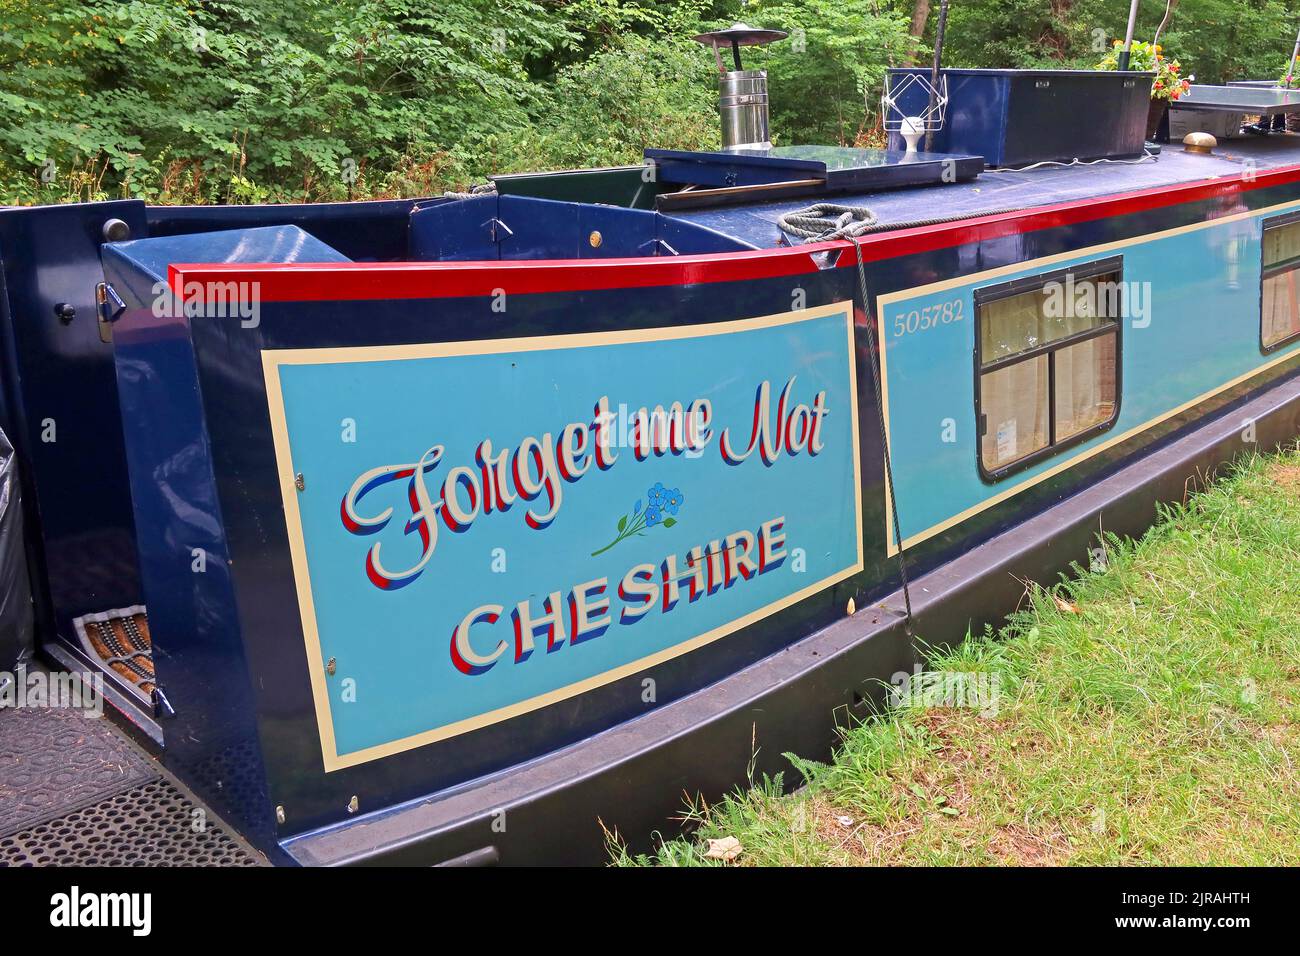 Forget Me Not, canal barge 505782, Cheshire, moored in Llangollen, Wales, UK, LL20 7BU Stock Photo